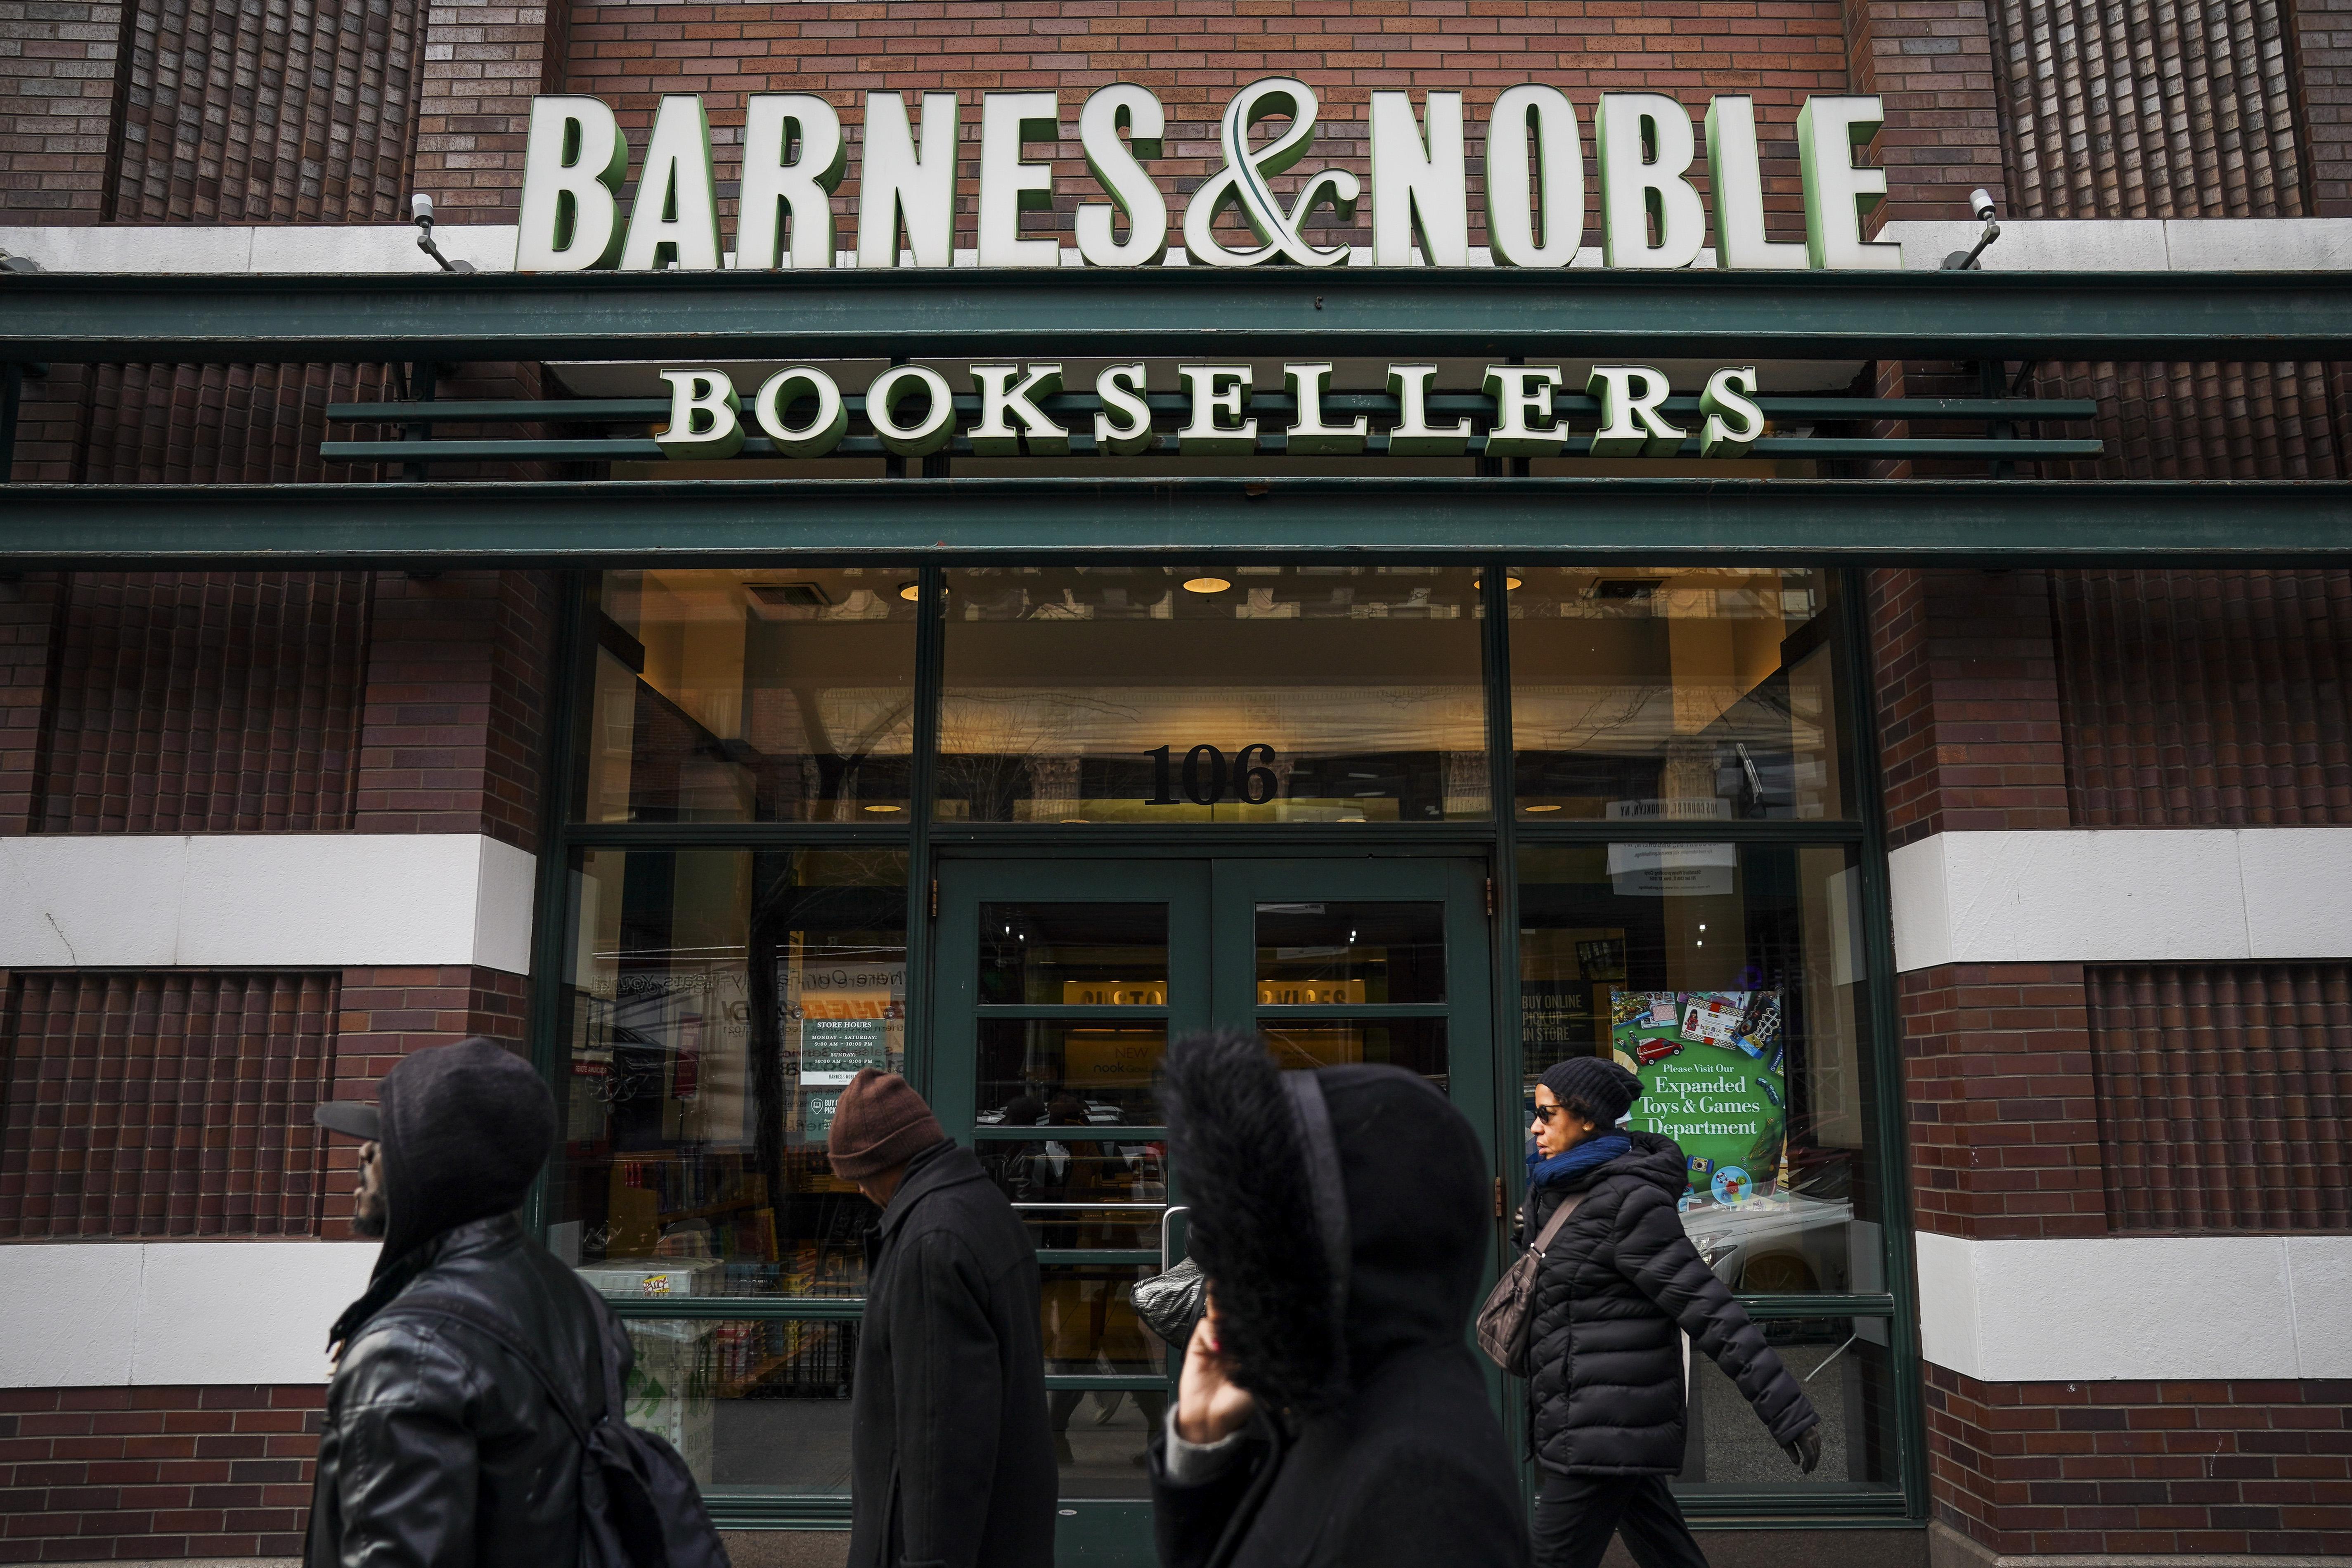 People walk by a Barnes & Noble bookstore.